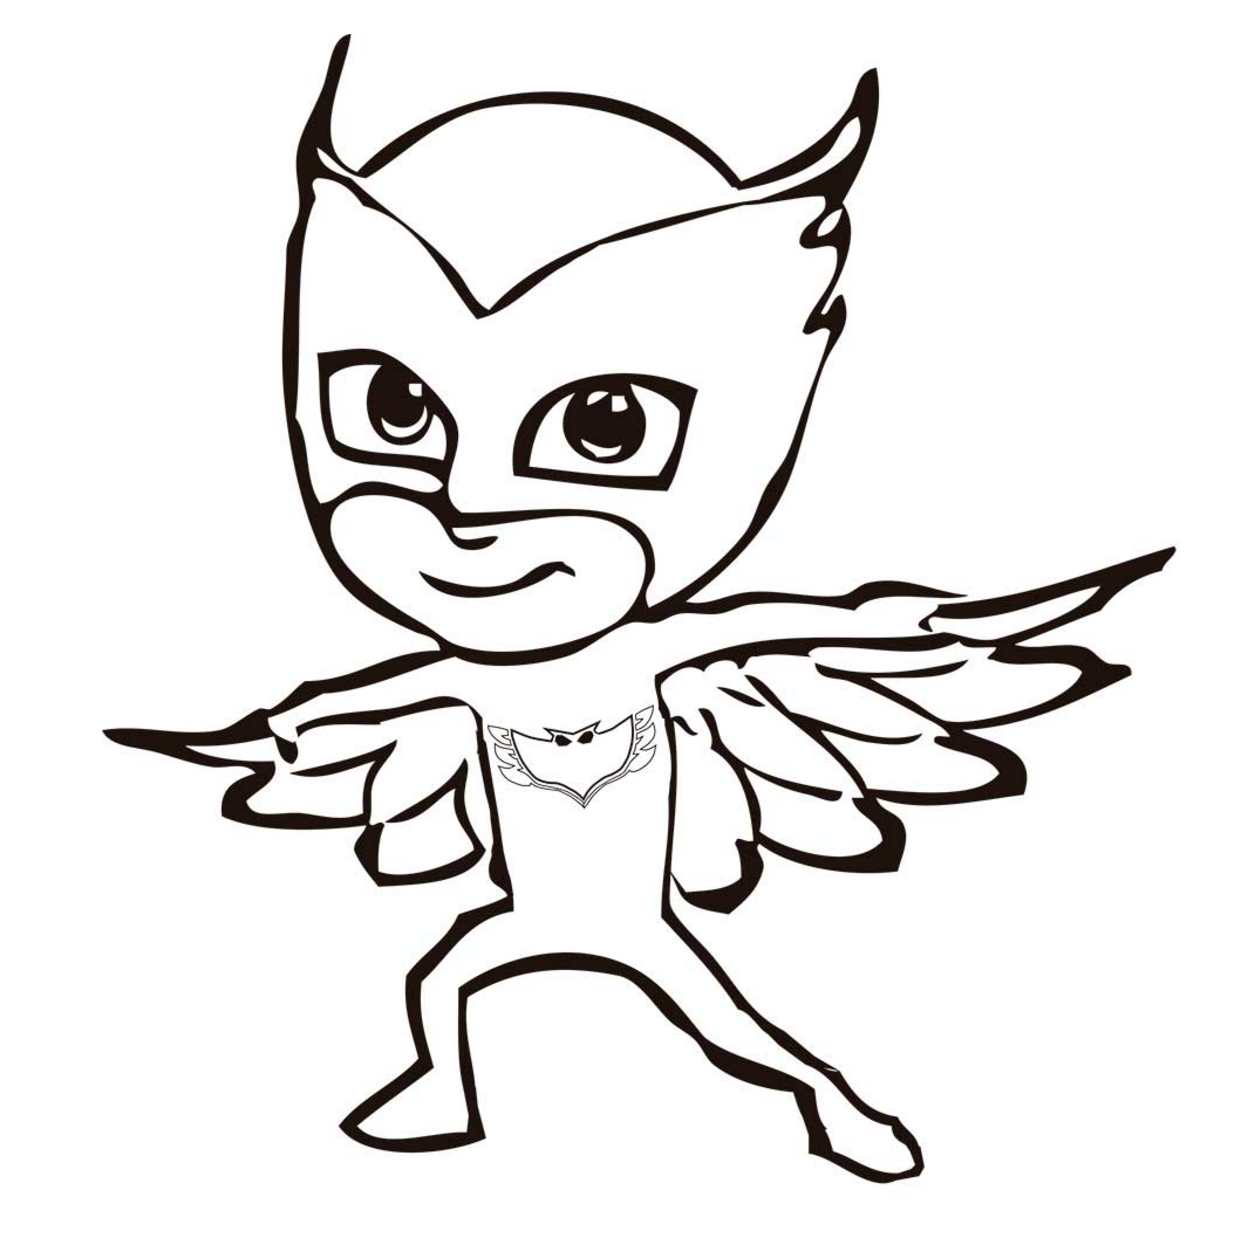 Free Pj Masks Coloring Pages, Download Free Clip Art, Free.